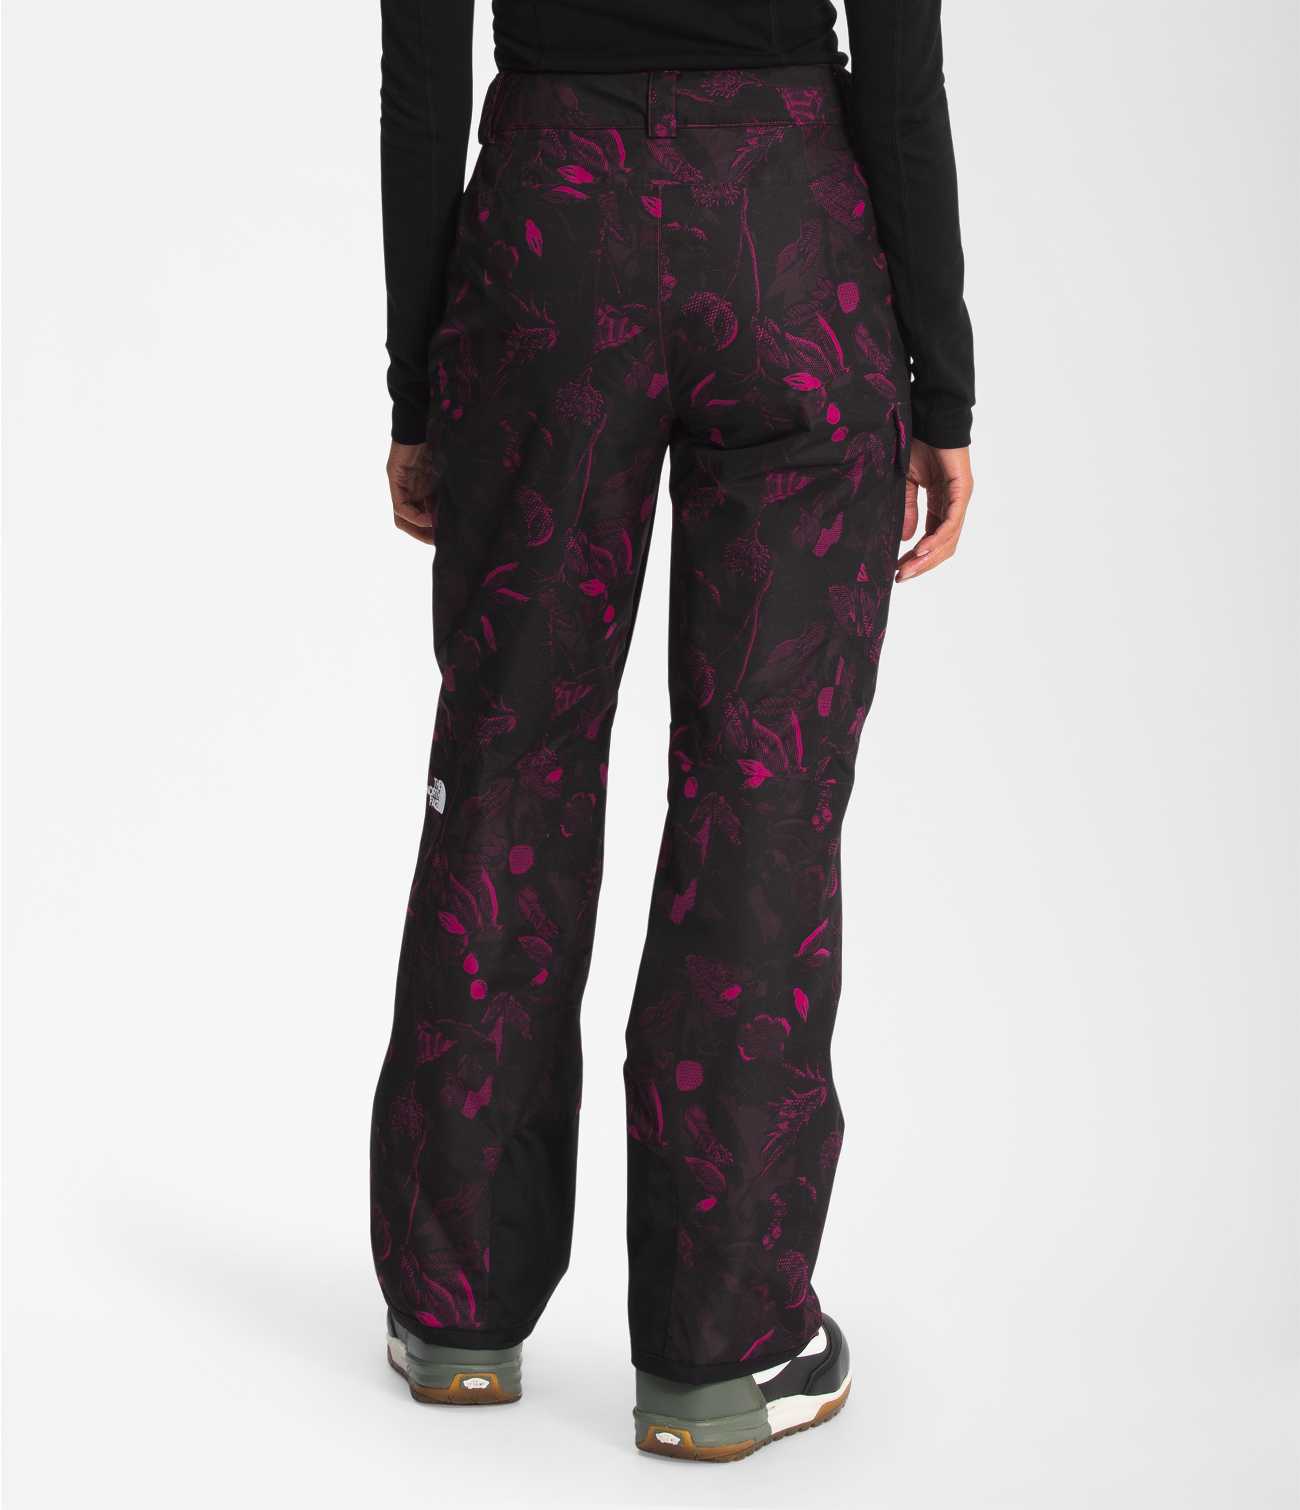 The North Face Freedom Insulated Women Pants – Oberson